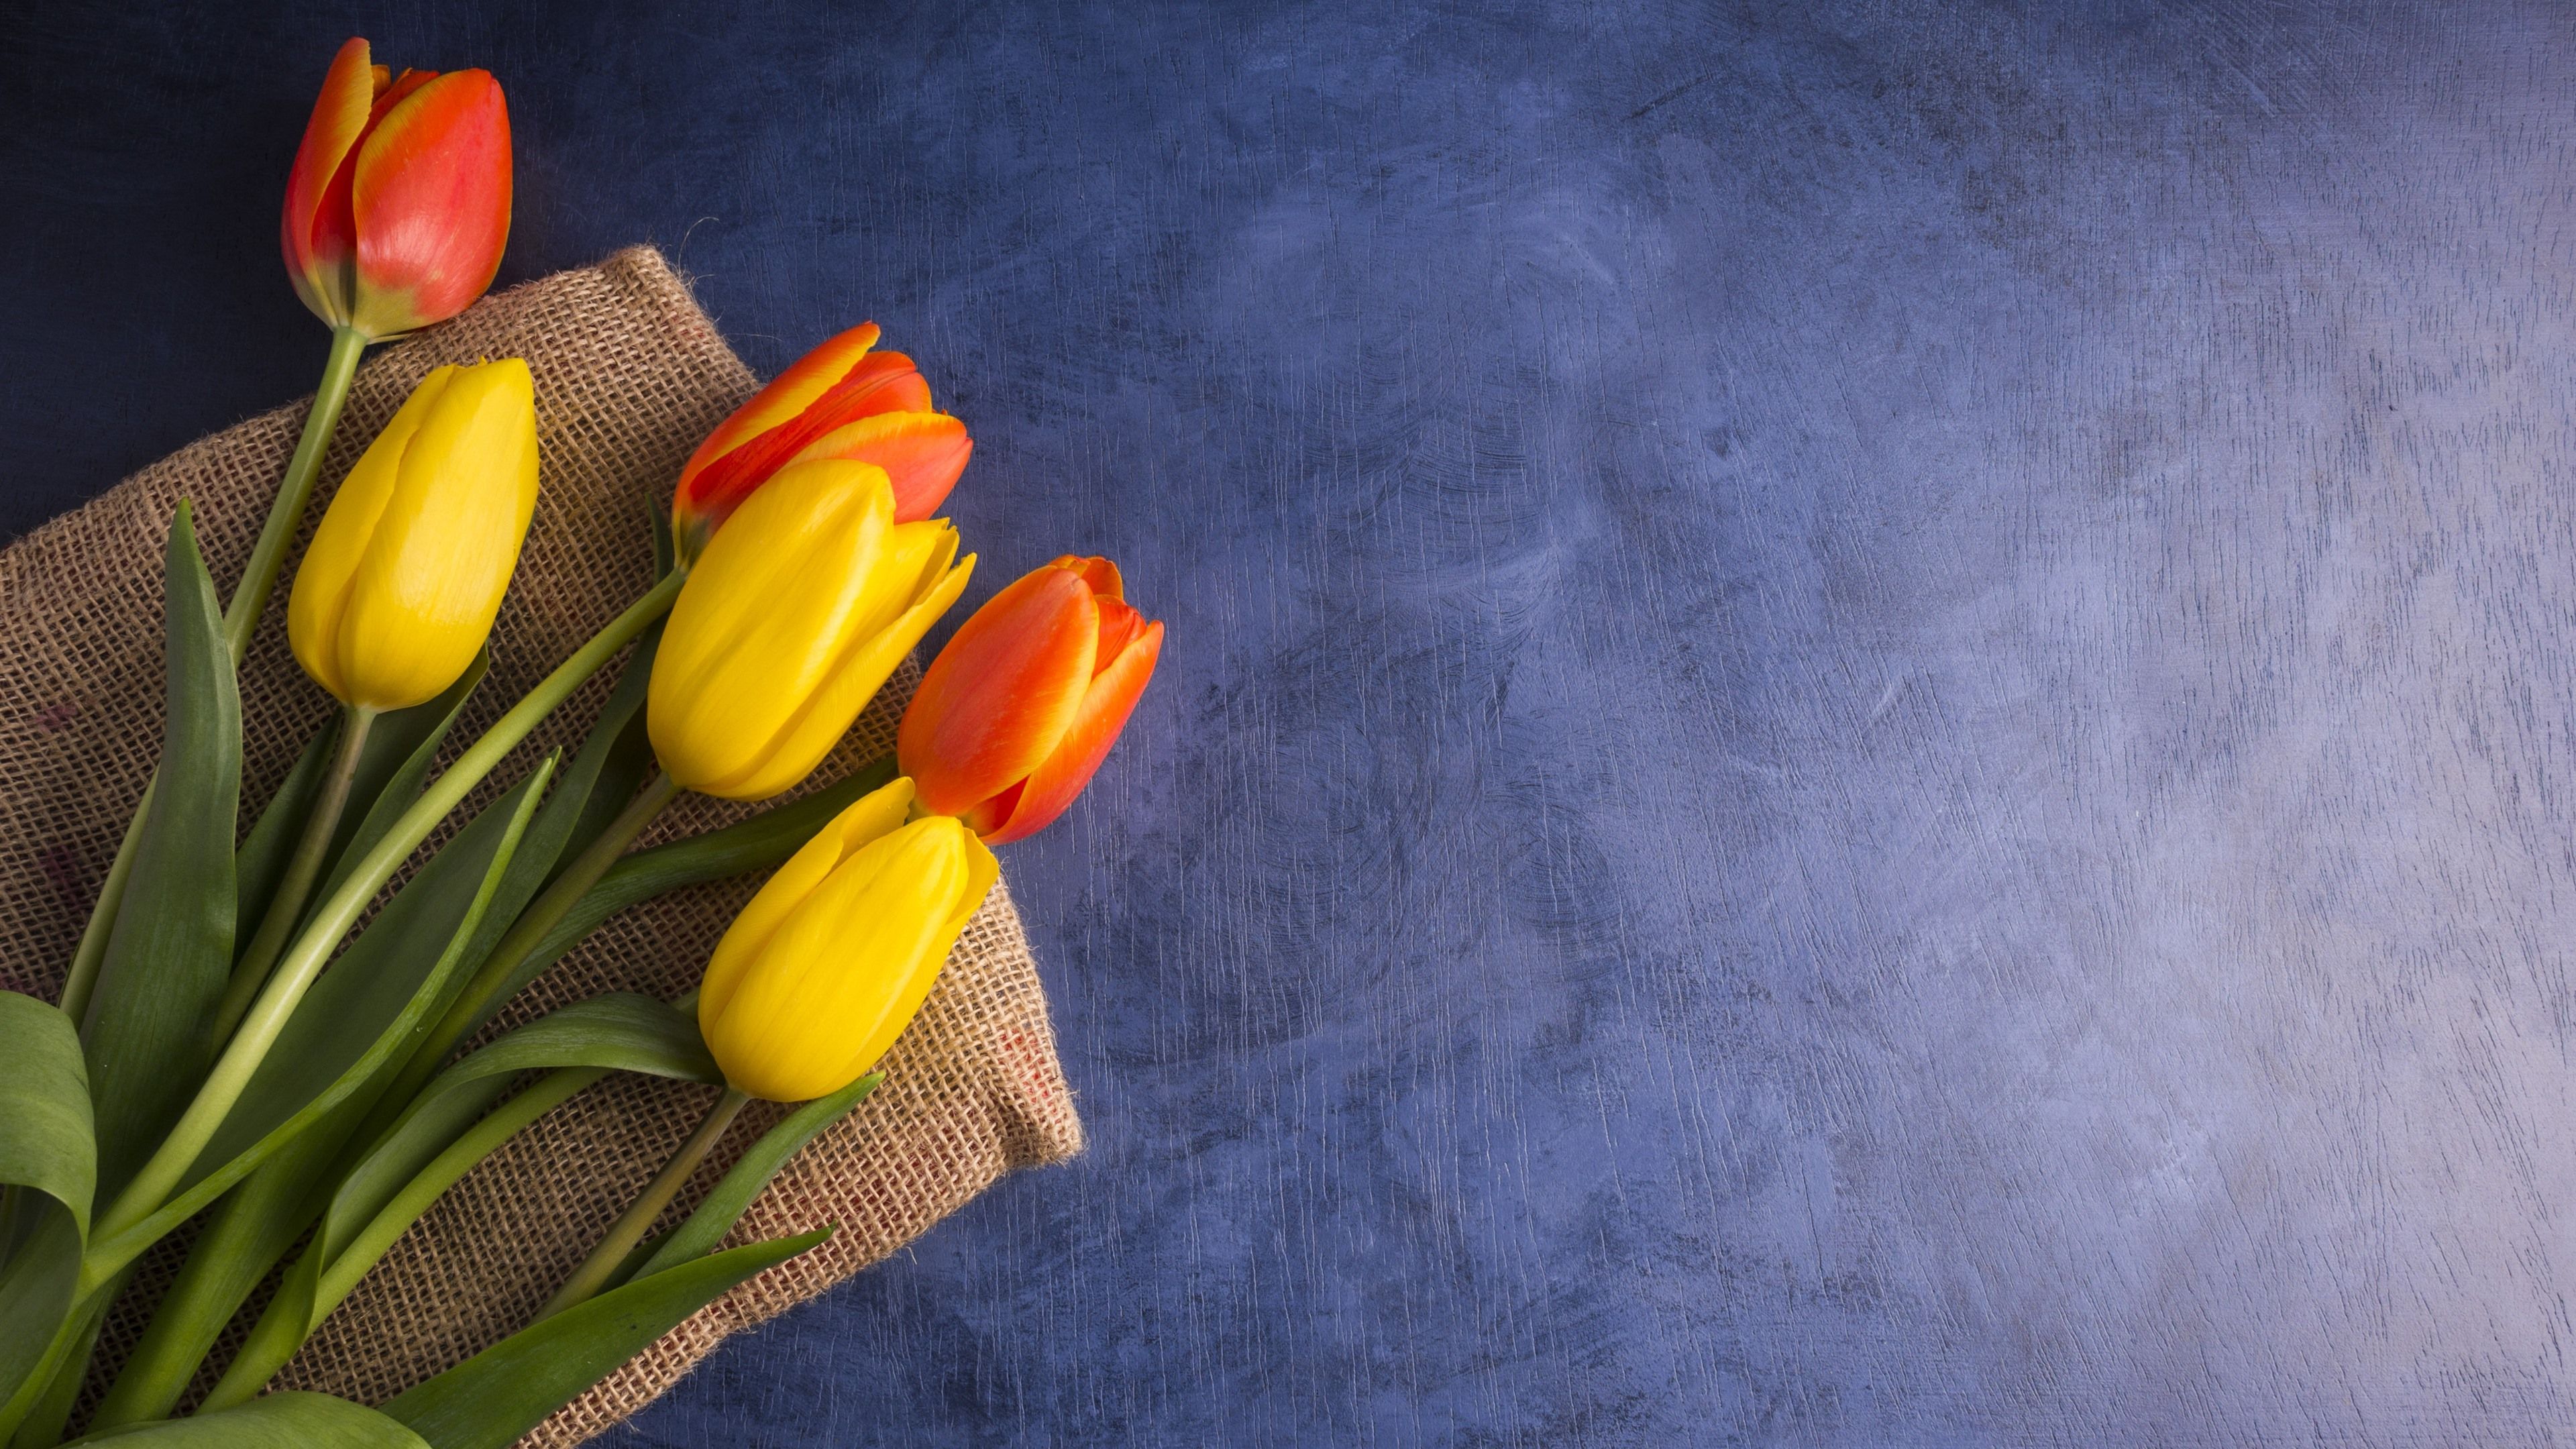 Wallpaper Yellow and orange tulips, bouquet 3840x2160 UHD 4K Picture, Image